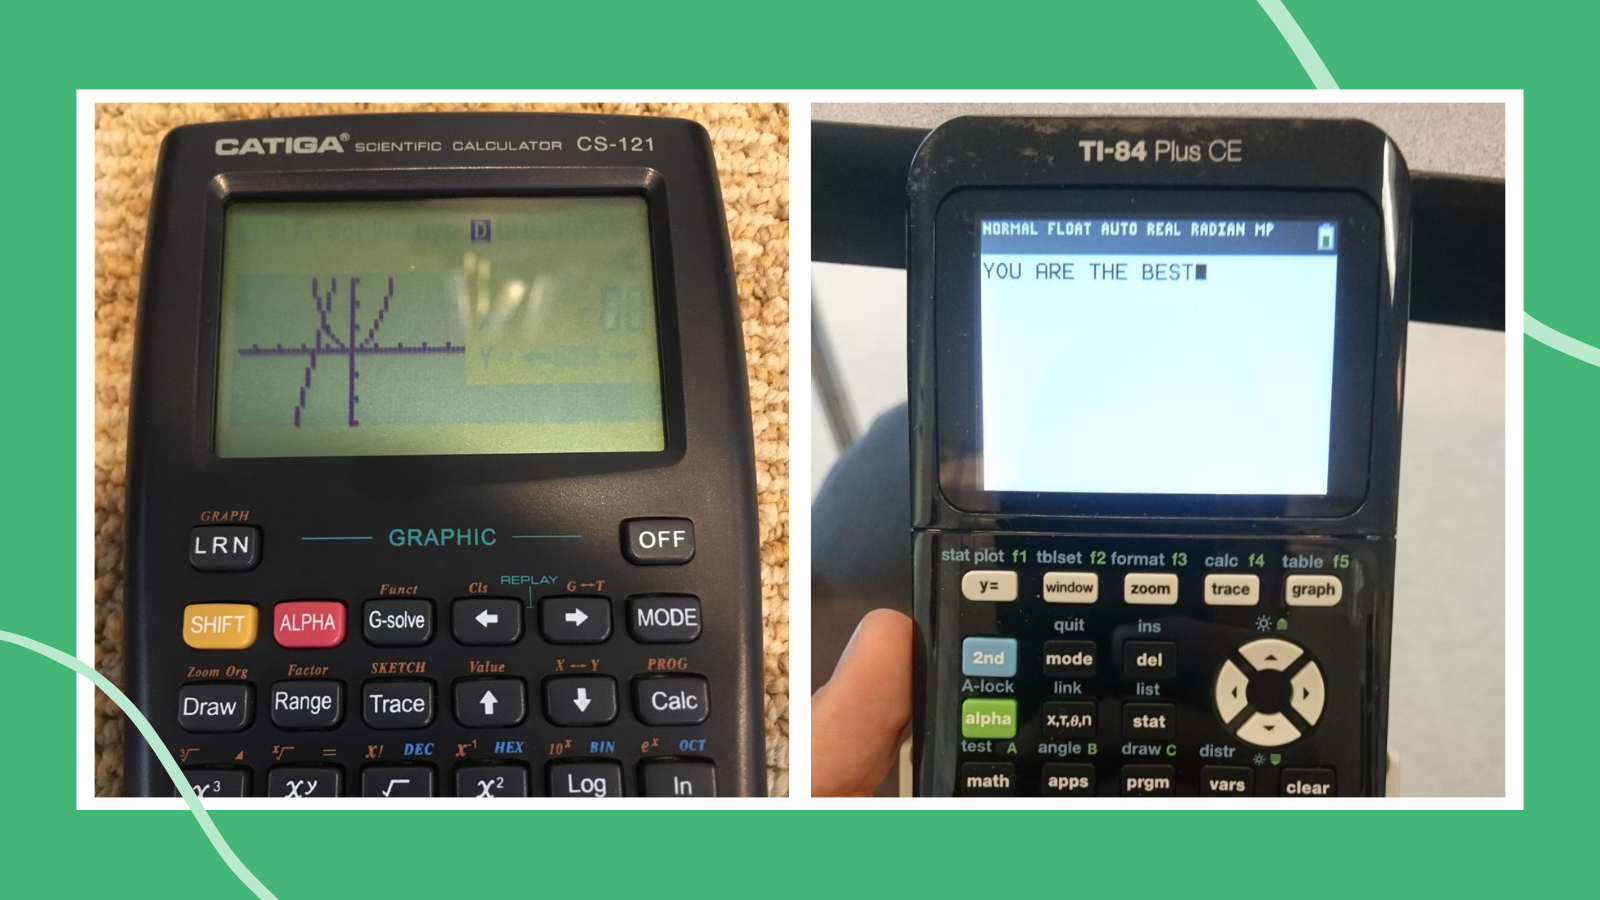 Two of the best graphing calculators, one from Texas Instruments and one from Casio.